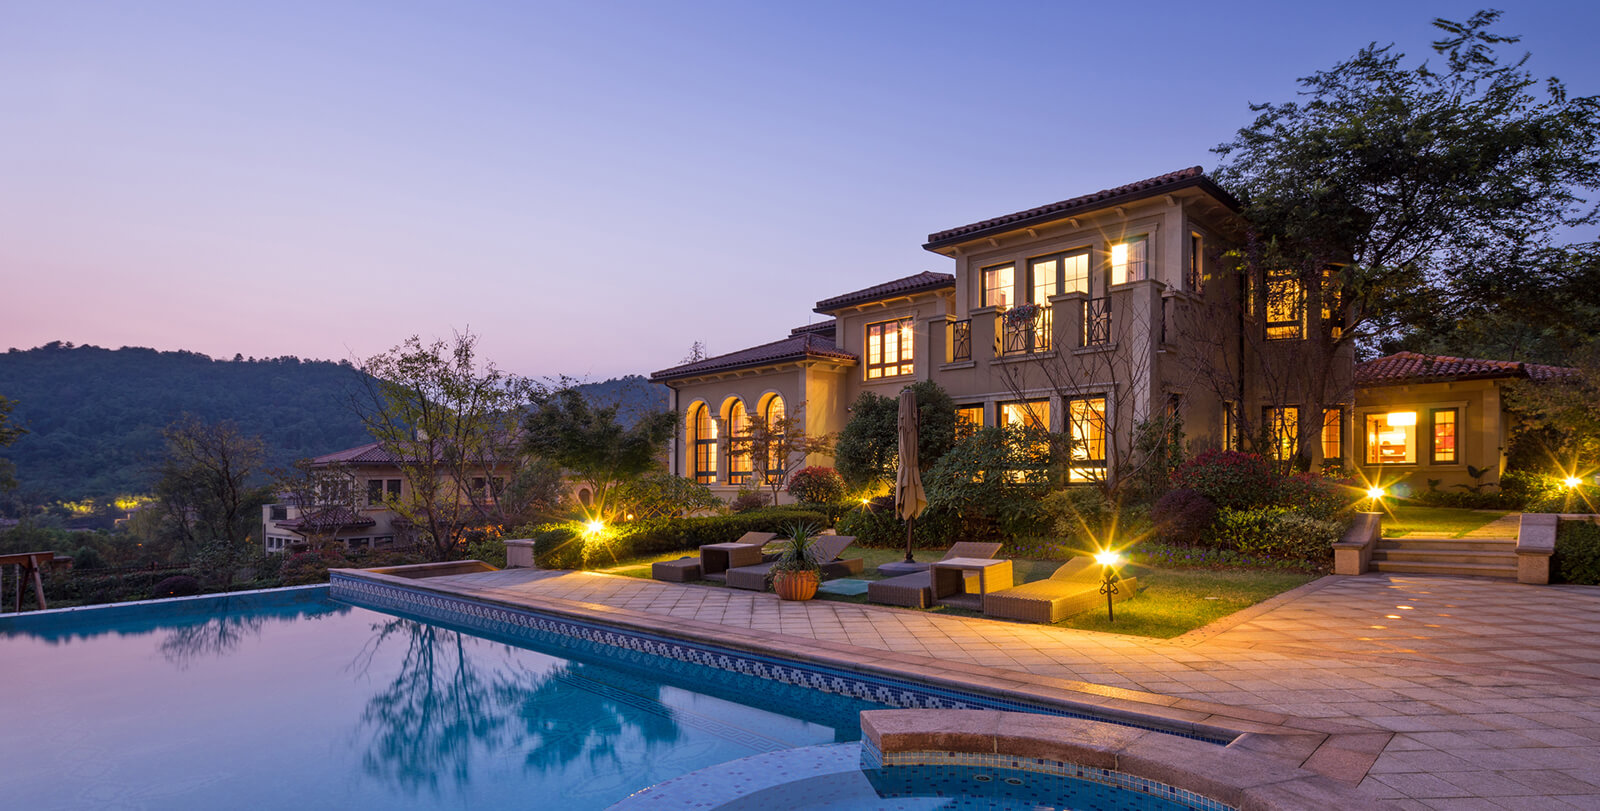 Luxury House with pool during sunset